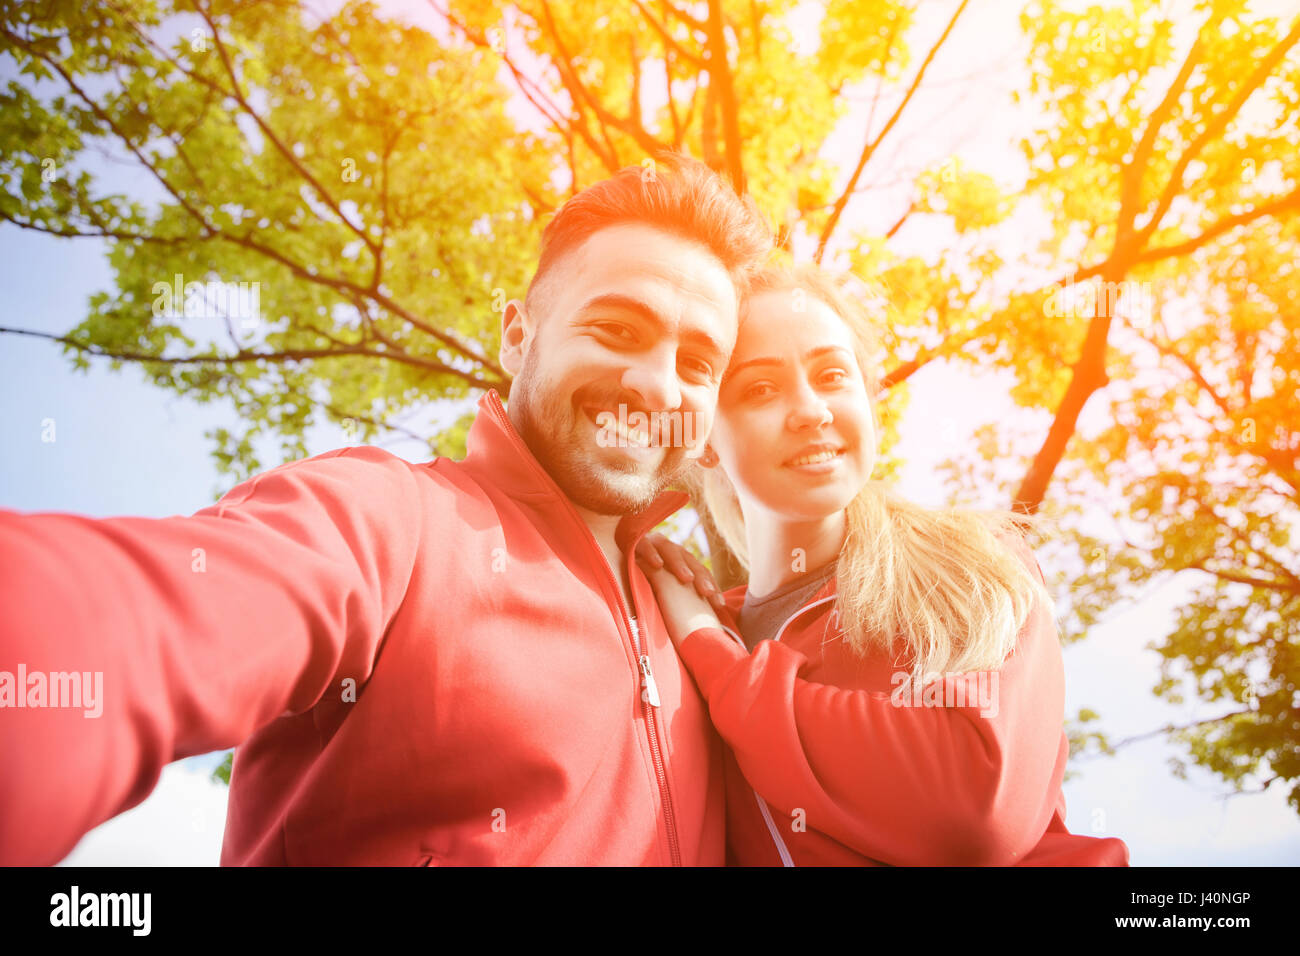 Sport man and woman making selfies in park Stock Photo